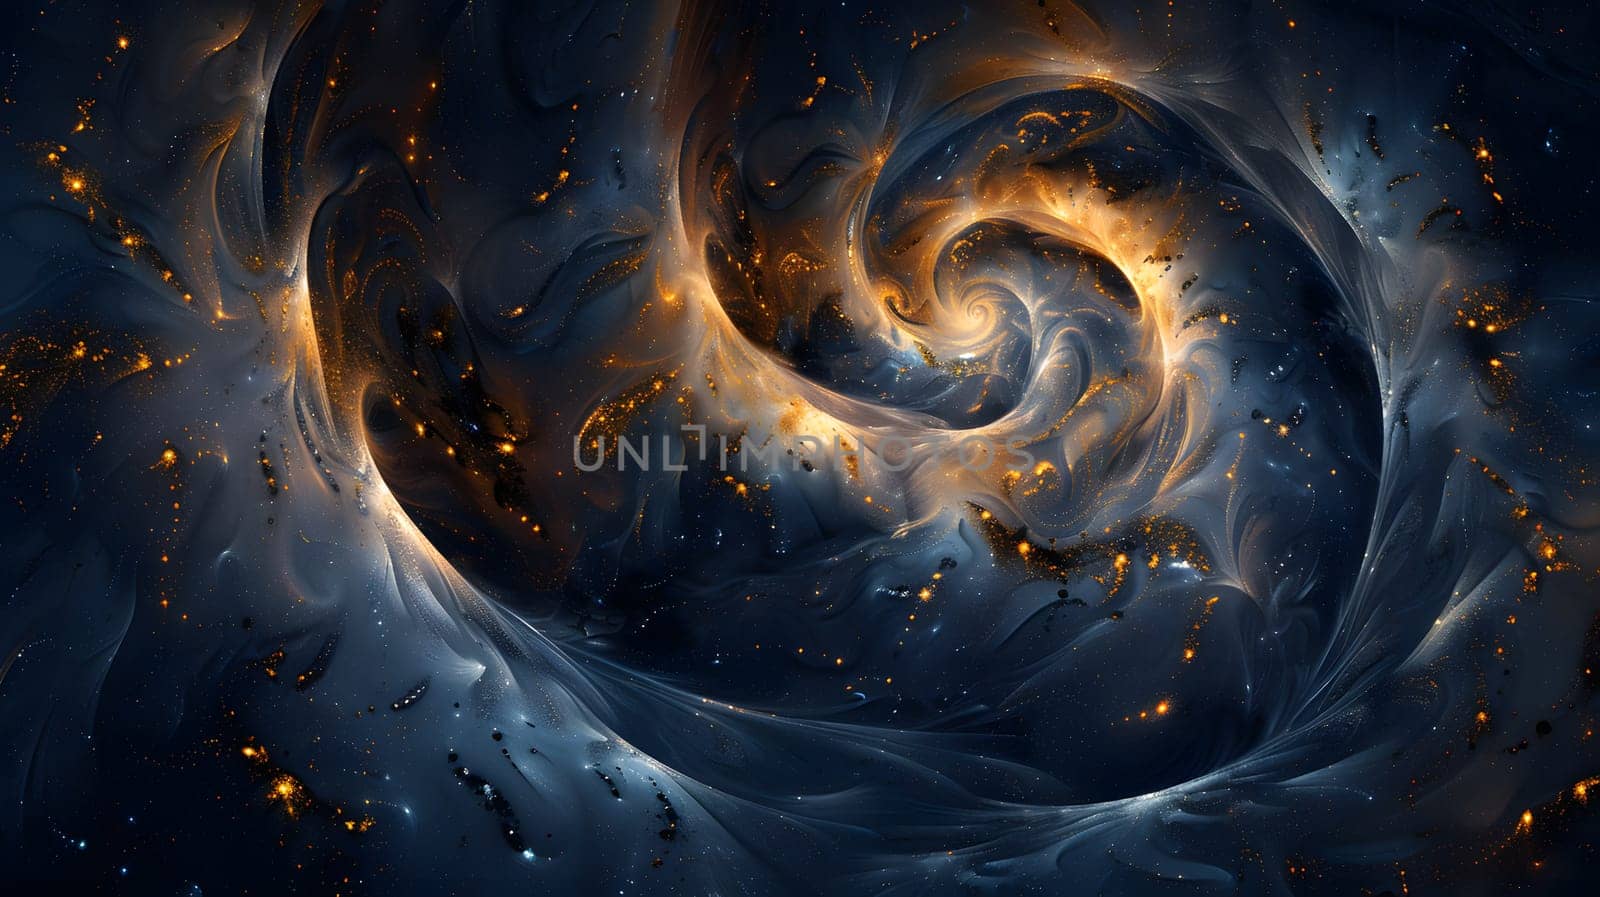 a computer generated image of a swirling galaxy in space by Nadtochiy